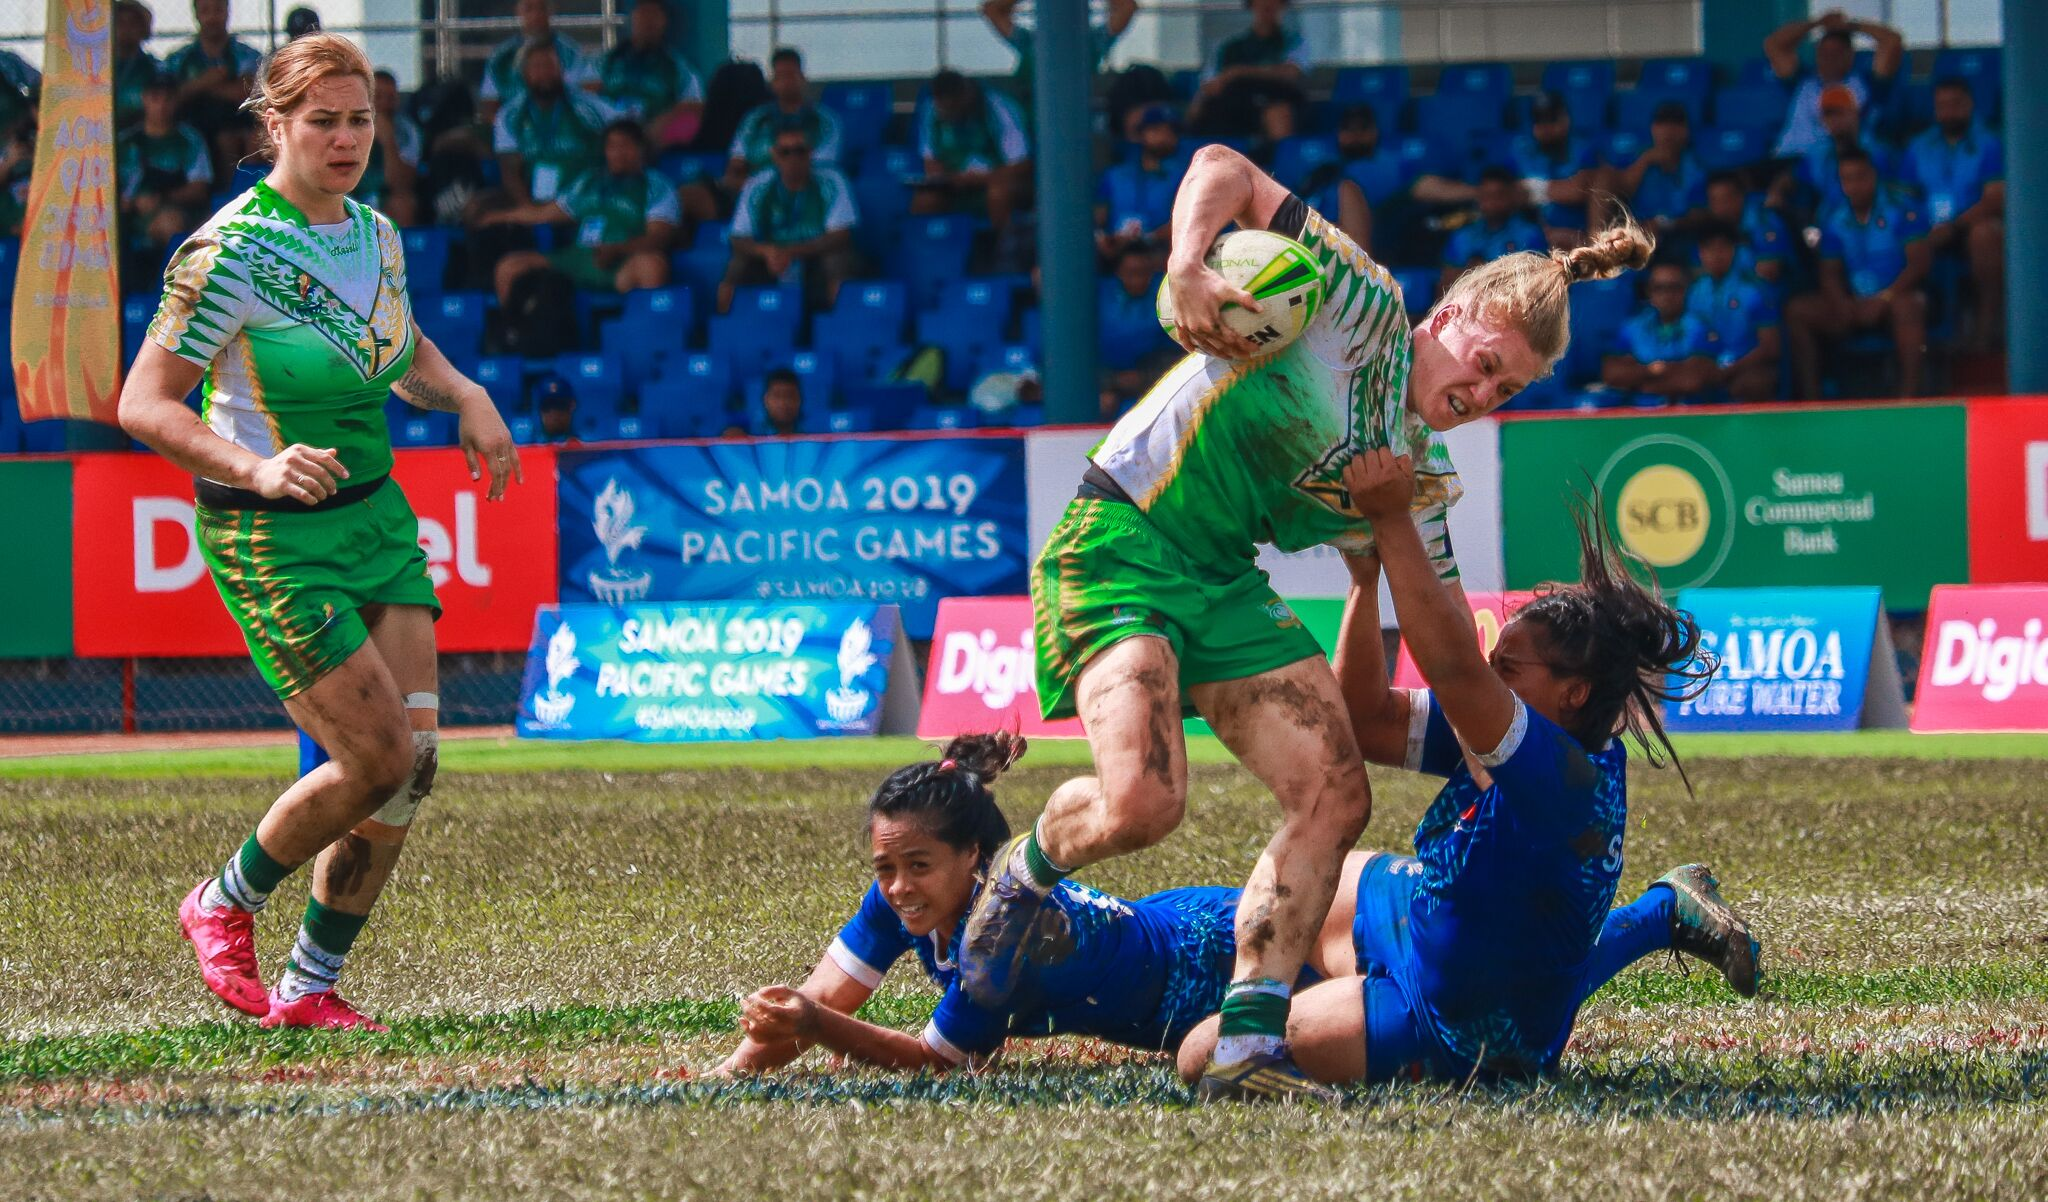 Samoa 2019: Day one of competition